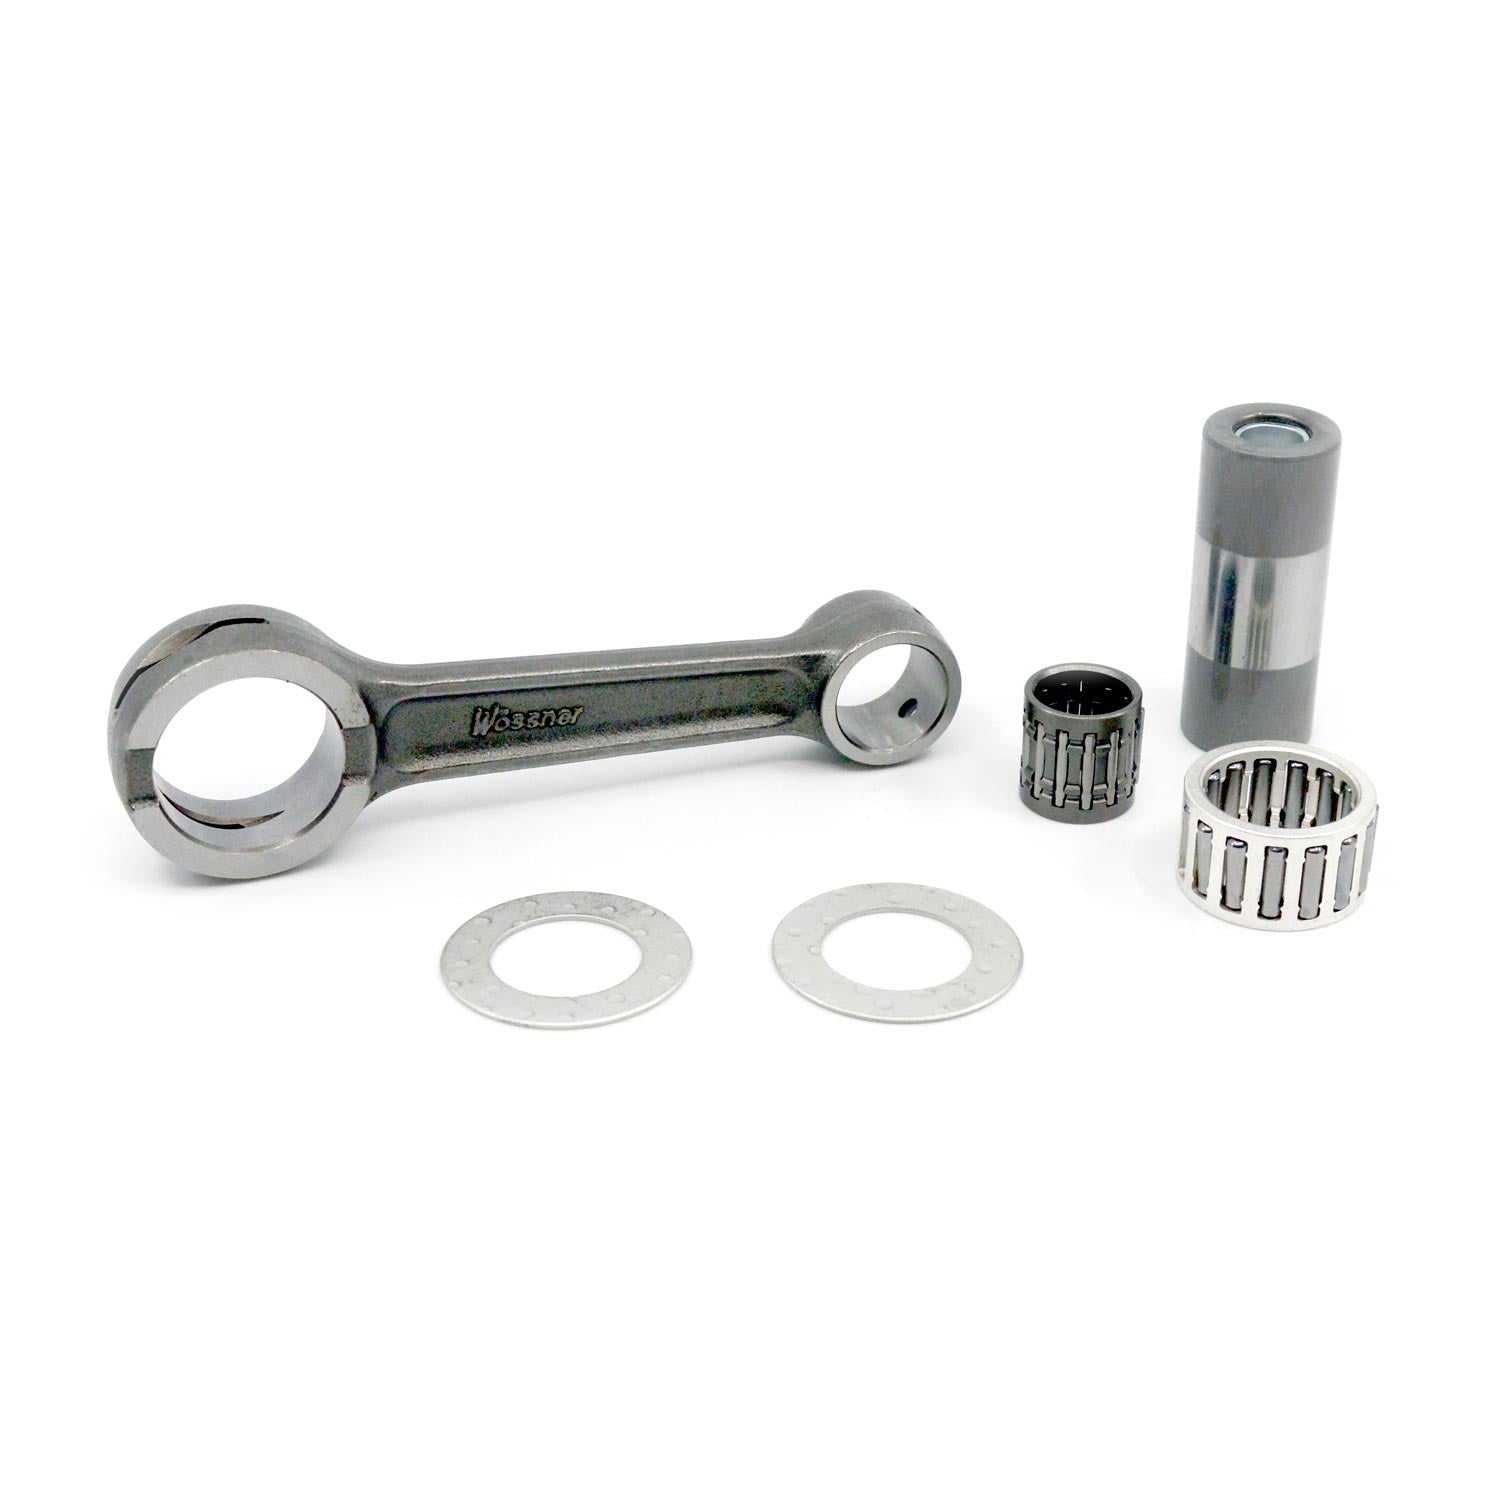 WOSSNER, CONROD KIT WOSSNER TRX450R 04-05